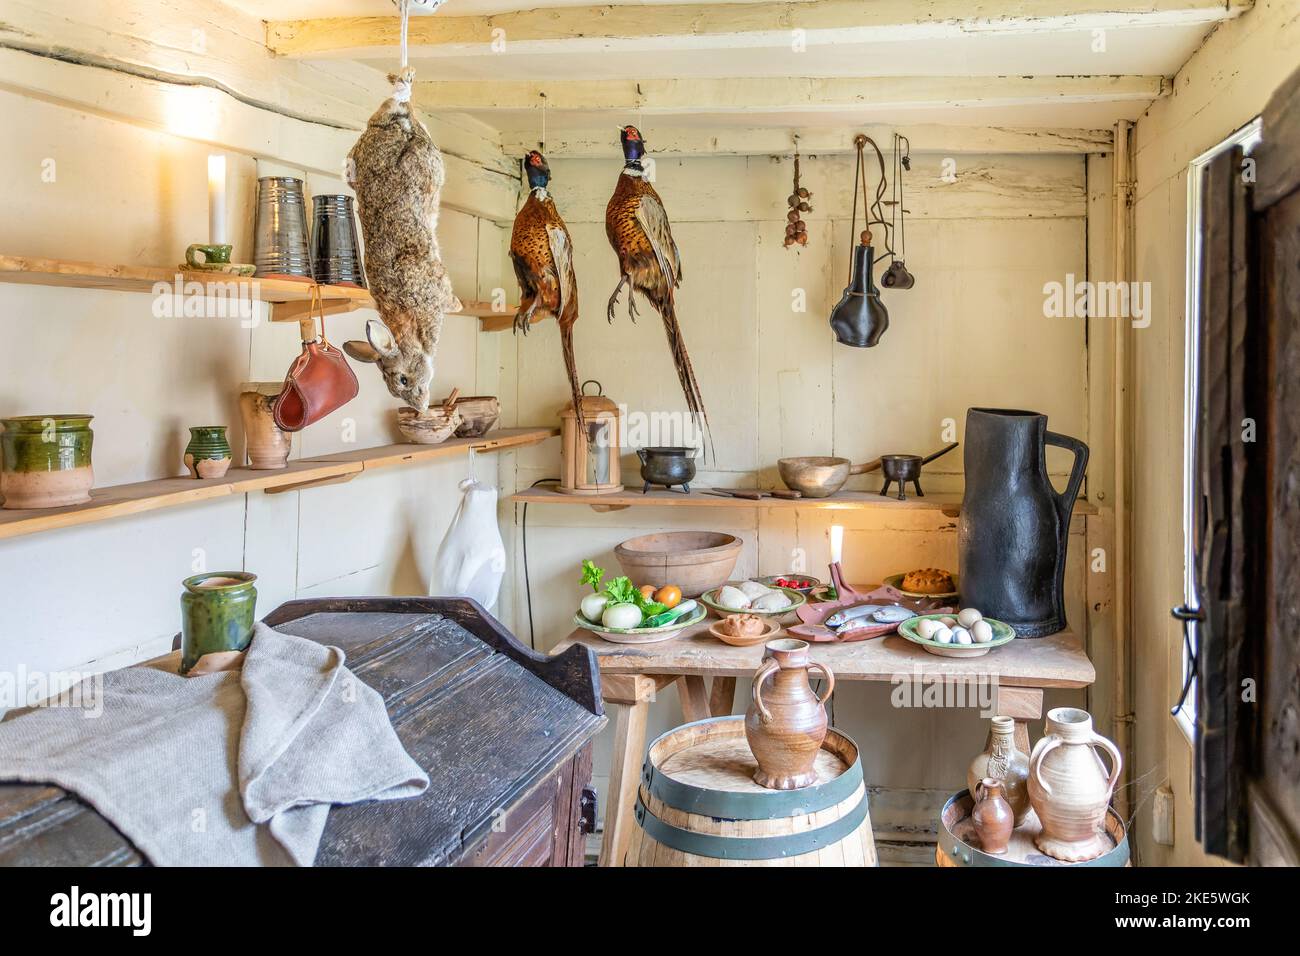 Pantry with game birds and hare hanging inside the birthplace of William Shakespeare in Henly Street, Stratford upon Avon, Warwickshire, UK on 8 Novem Stock Photo